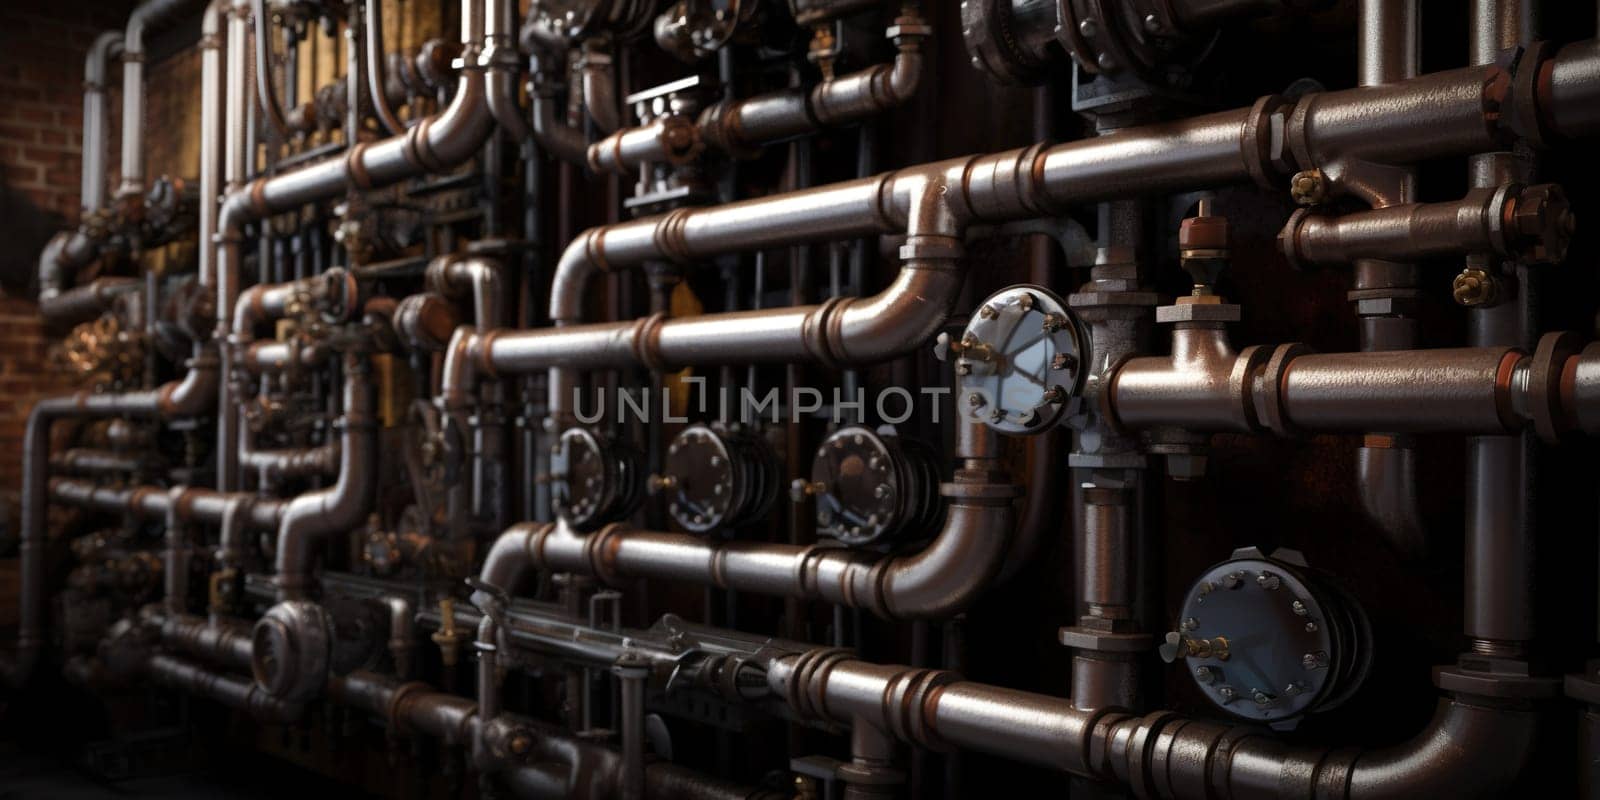 Heating And Water Pipes On The Wall by tan4ikk1